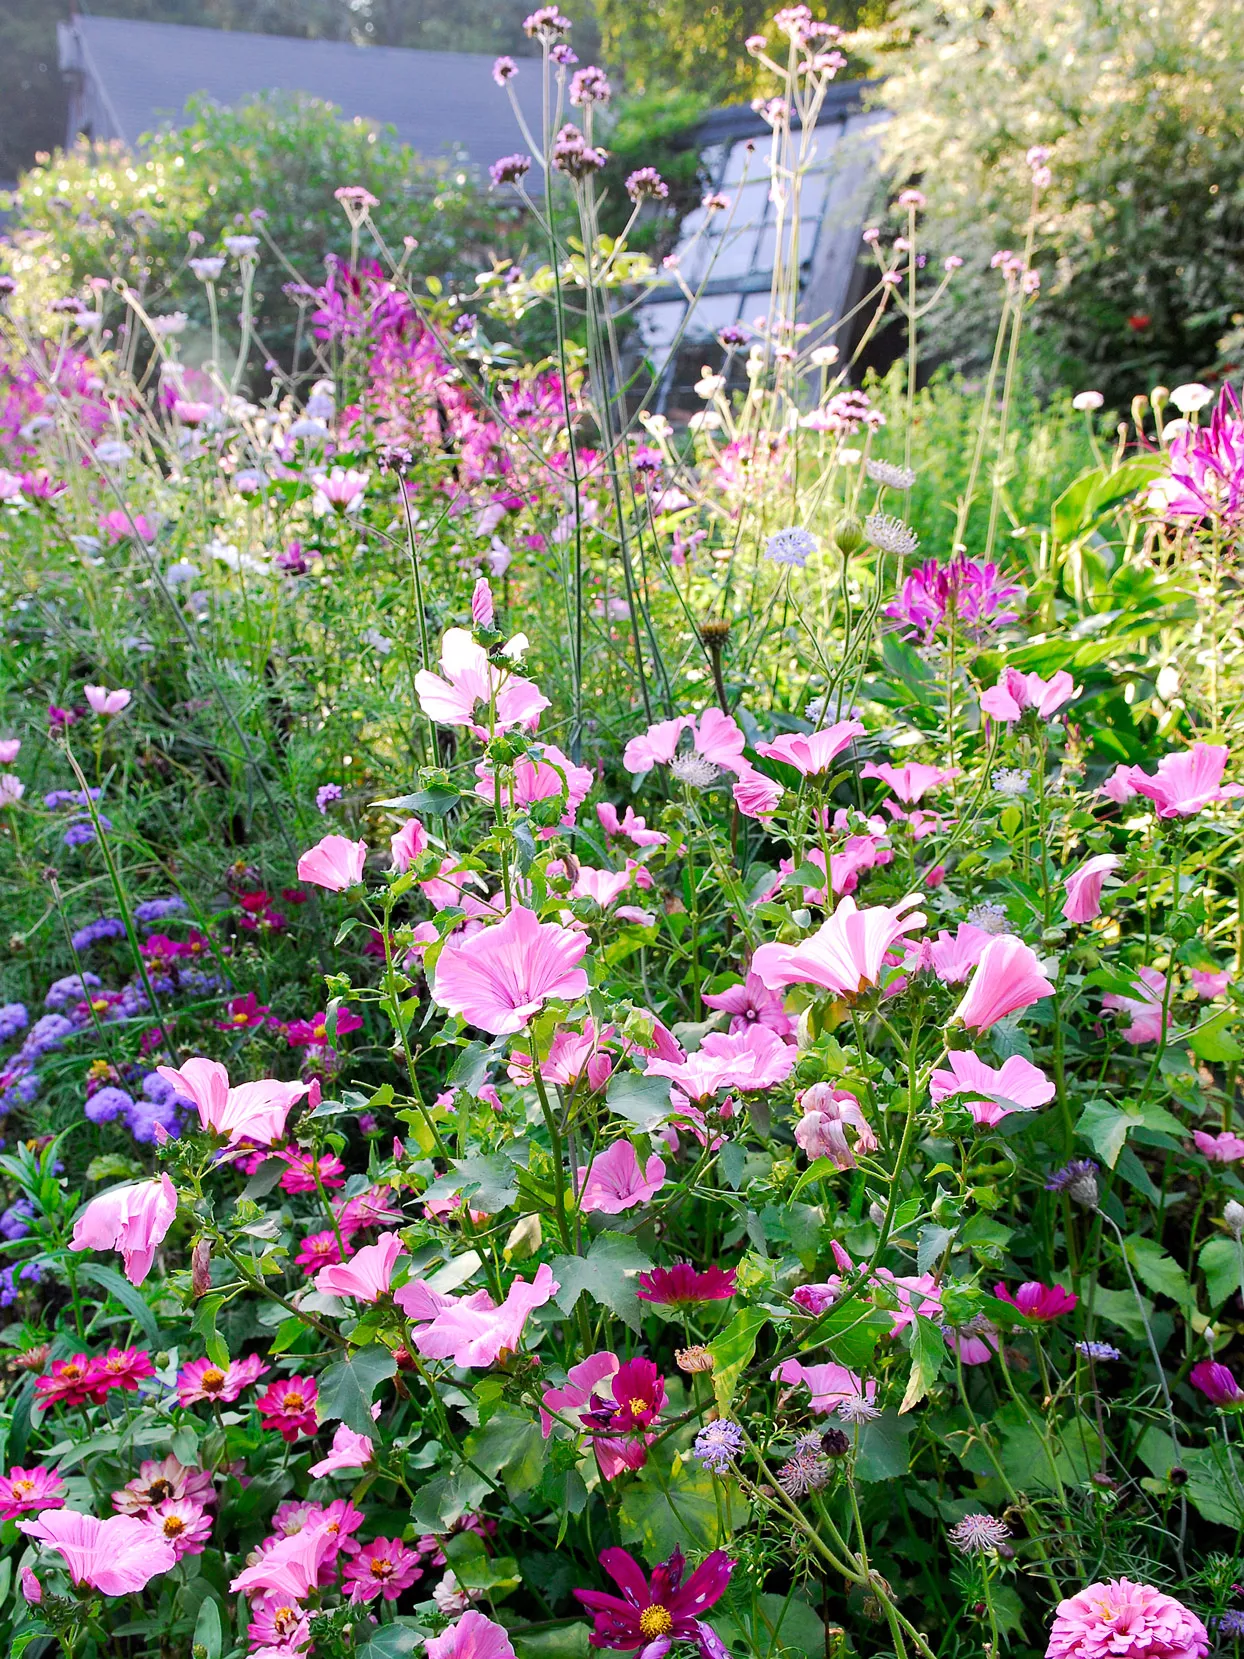 variety of annuals such as cosmos, zinnias and coneflowers in garden